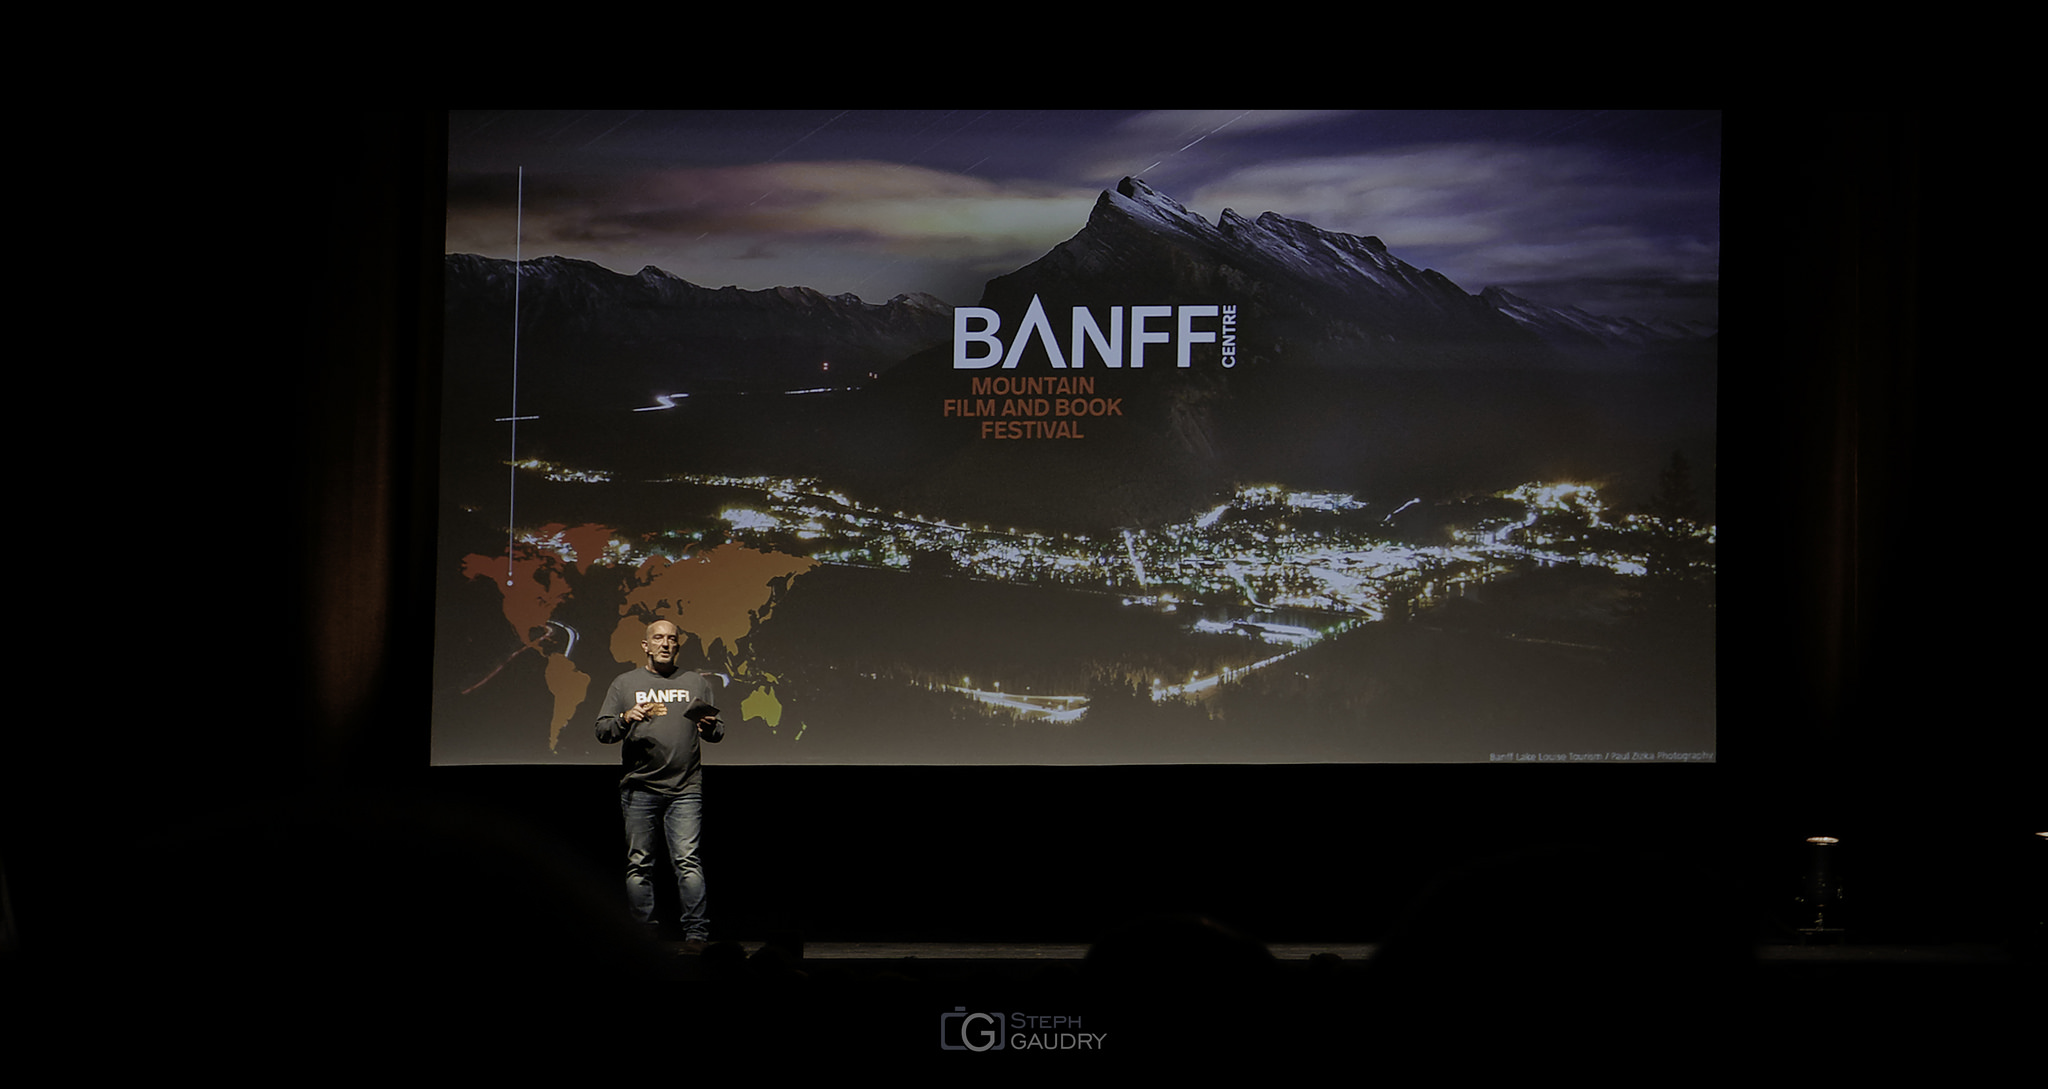 Festival, spectacle, conférence / BANFF Mountain film and book festival